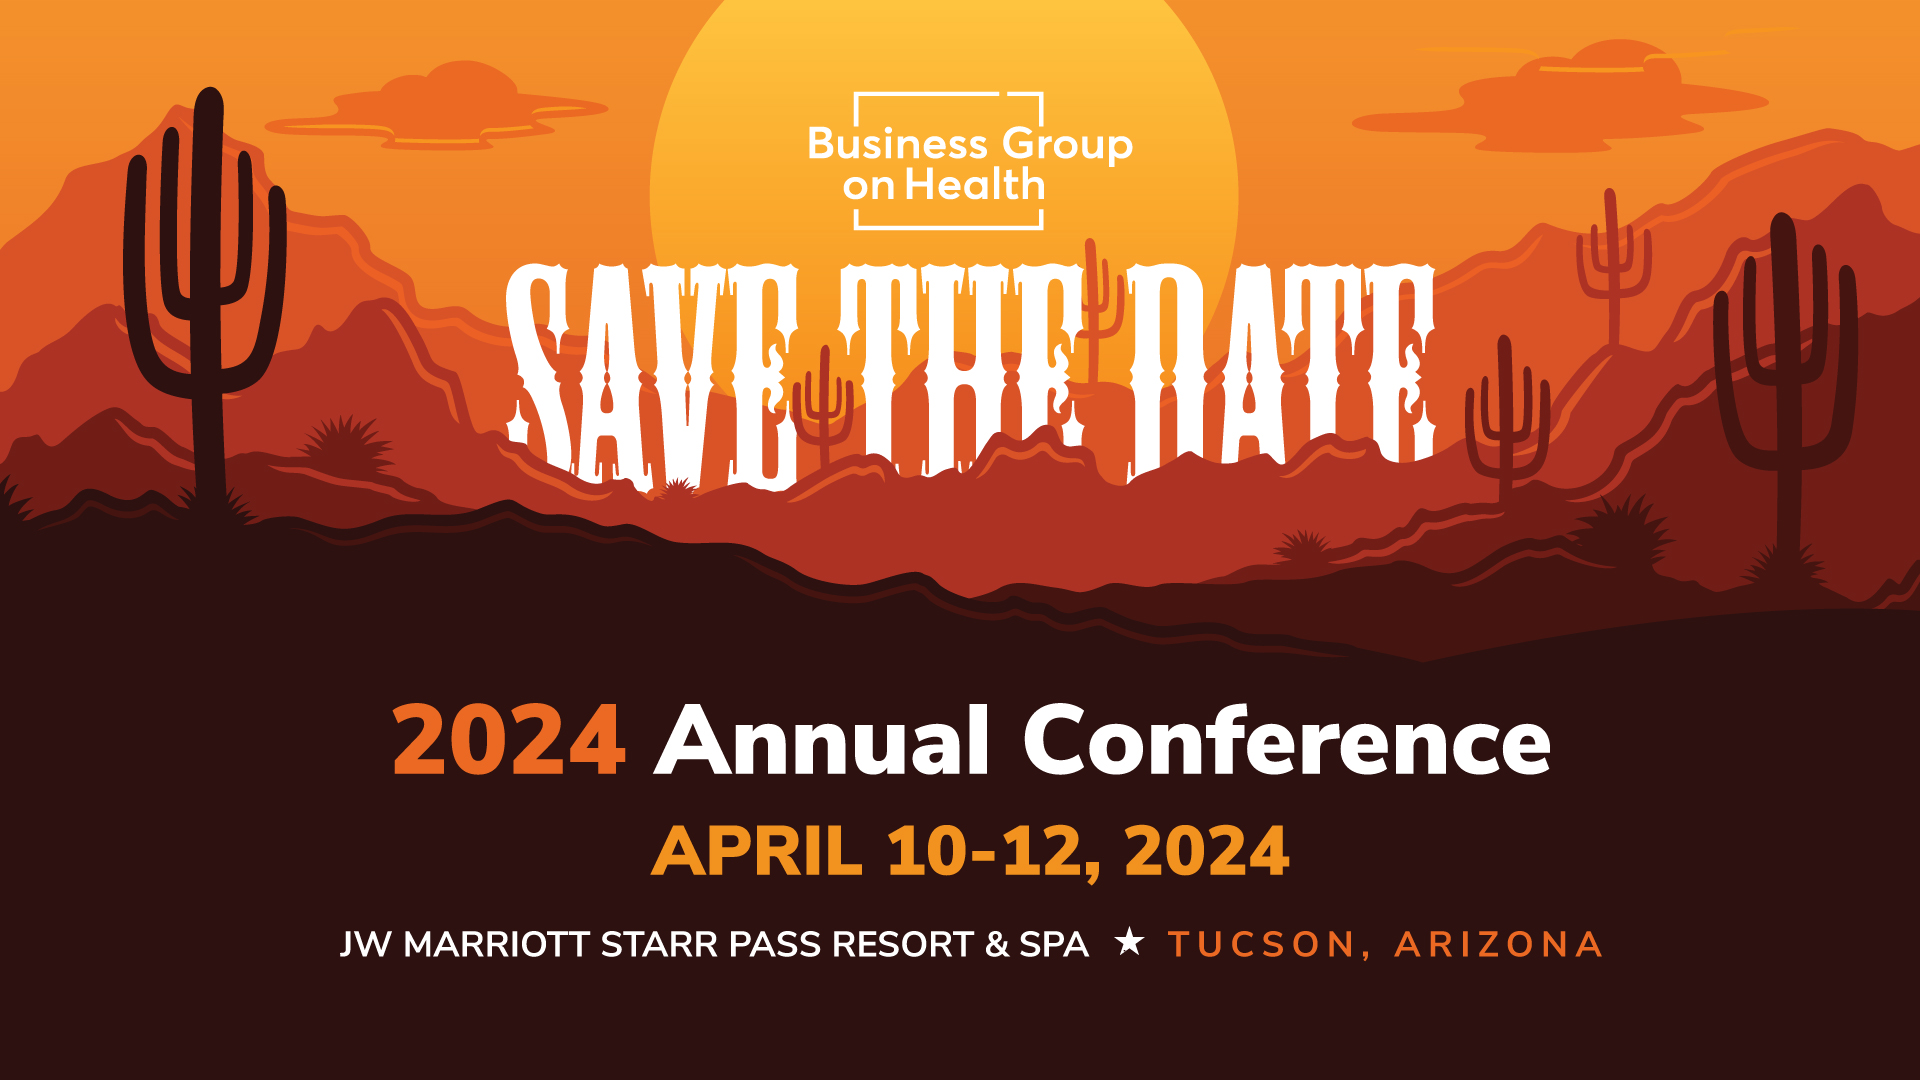 Save the Date: 2024 Annual Conference. April 10-12, 2024. Tucson, Arizona.